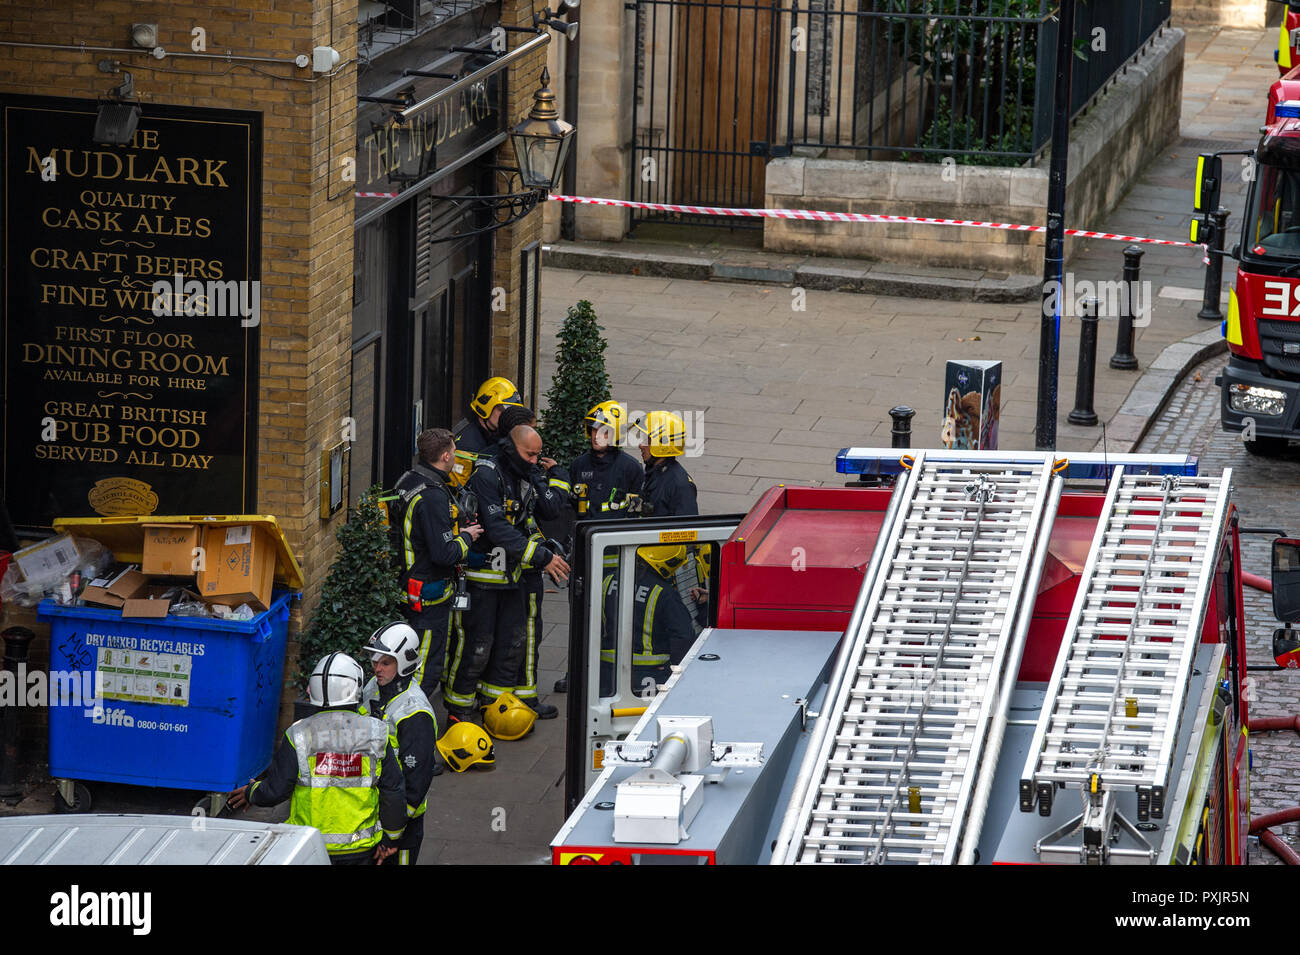 London, United Kingdom. 23 October 2018. Four fire engines and around 25 firefighters were called to a fire at a pub on Montague Close in London Bridge. There is a fire in the basement of the four-storey building. The Brigade was called at 1038. Fire crews from Dowgate, Dockhead, Whitechapel and Shoreditch fire stations are at the scene. The cause of the fire is not known at this stage. Credit: Peter Manning/Alamy Live News Stock Photo